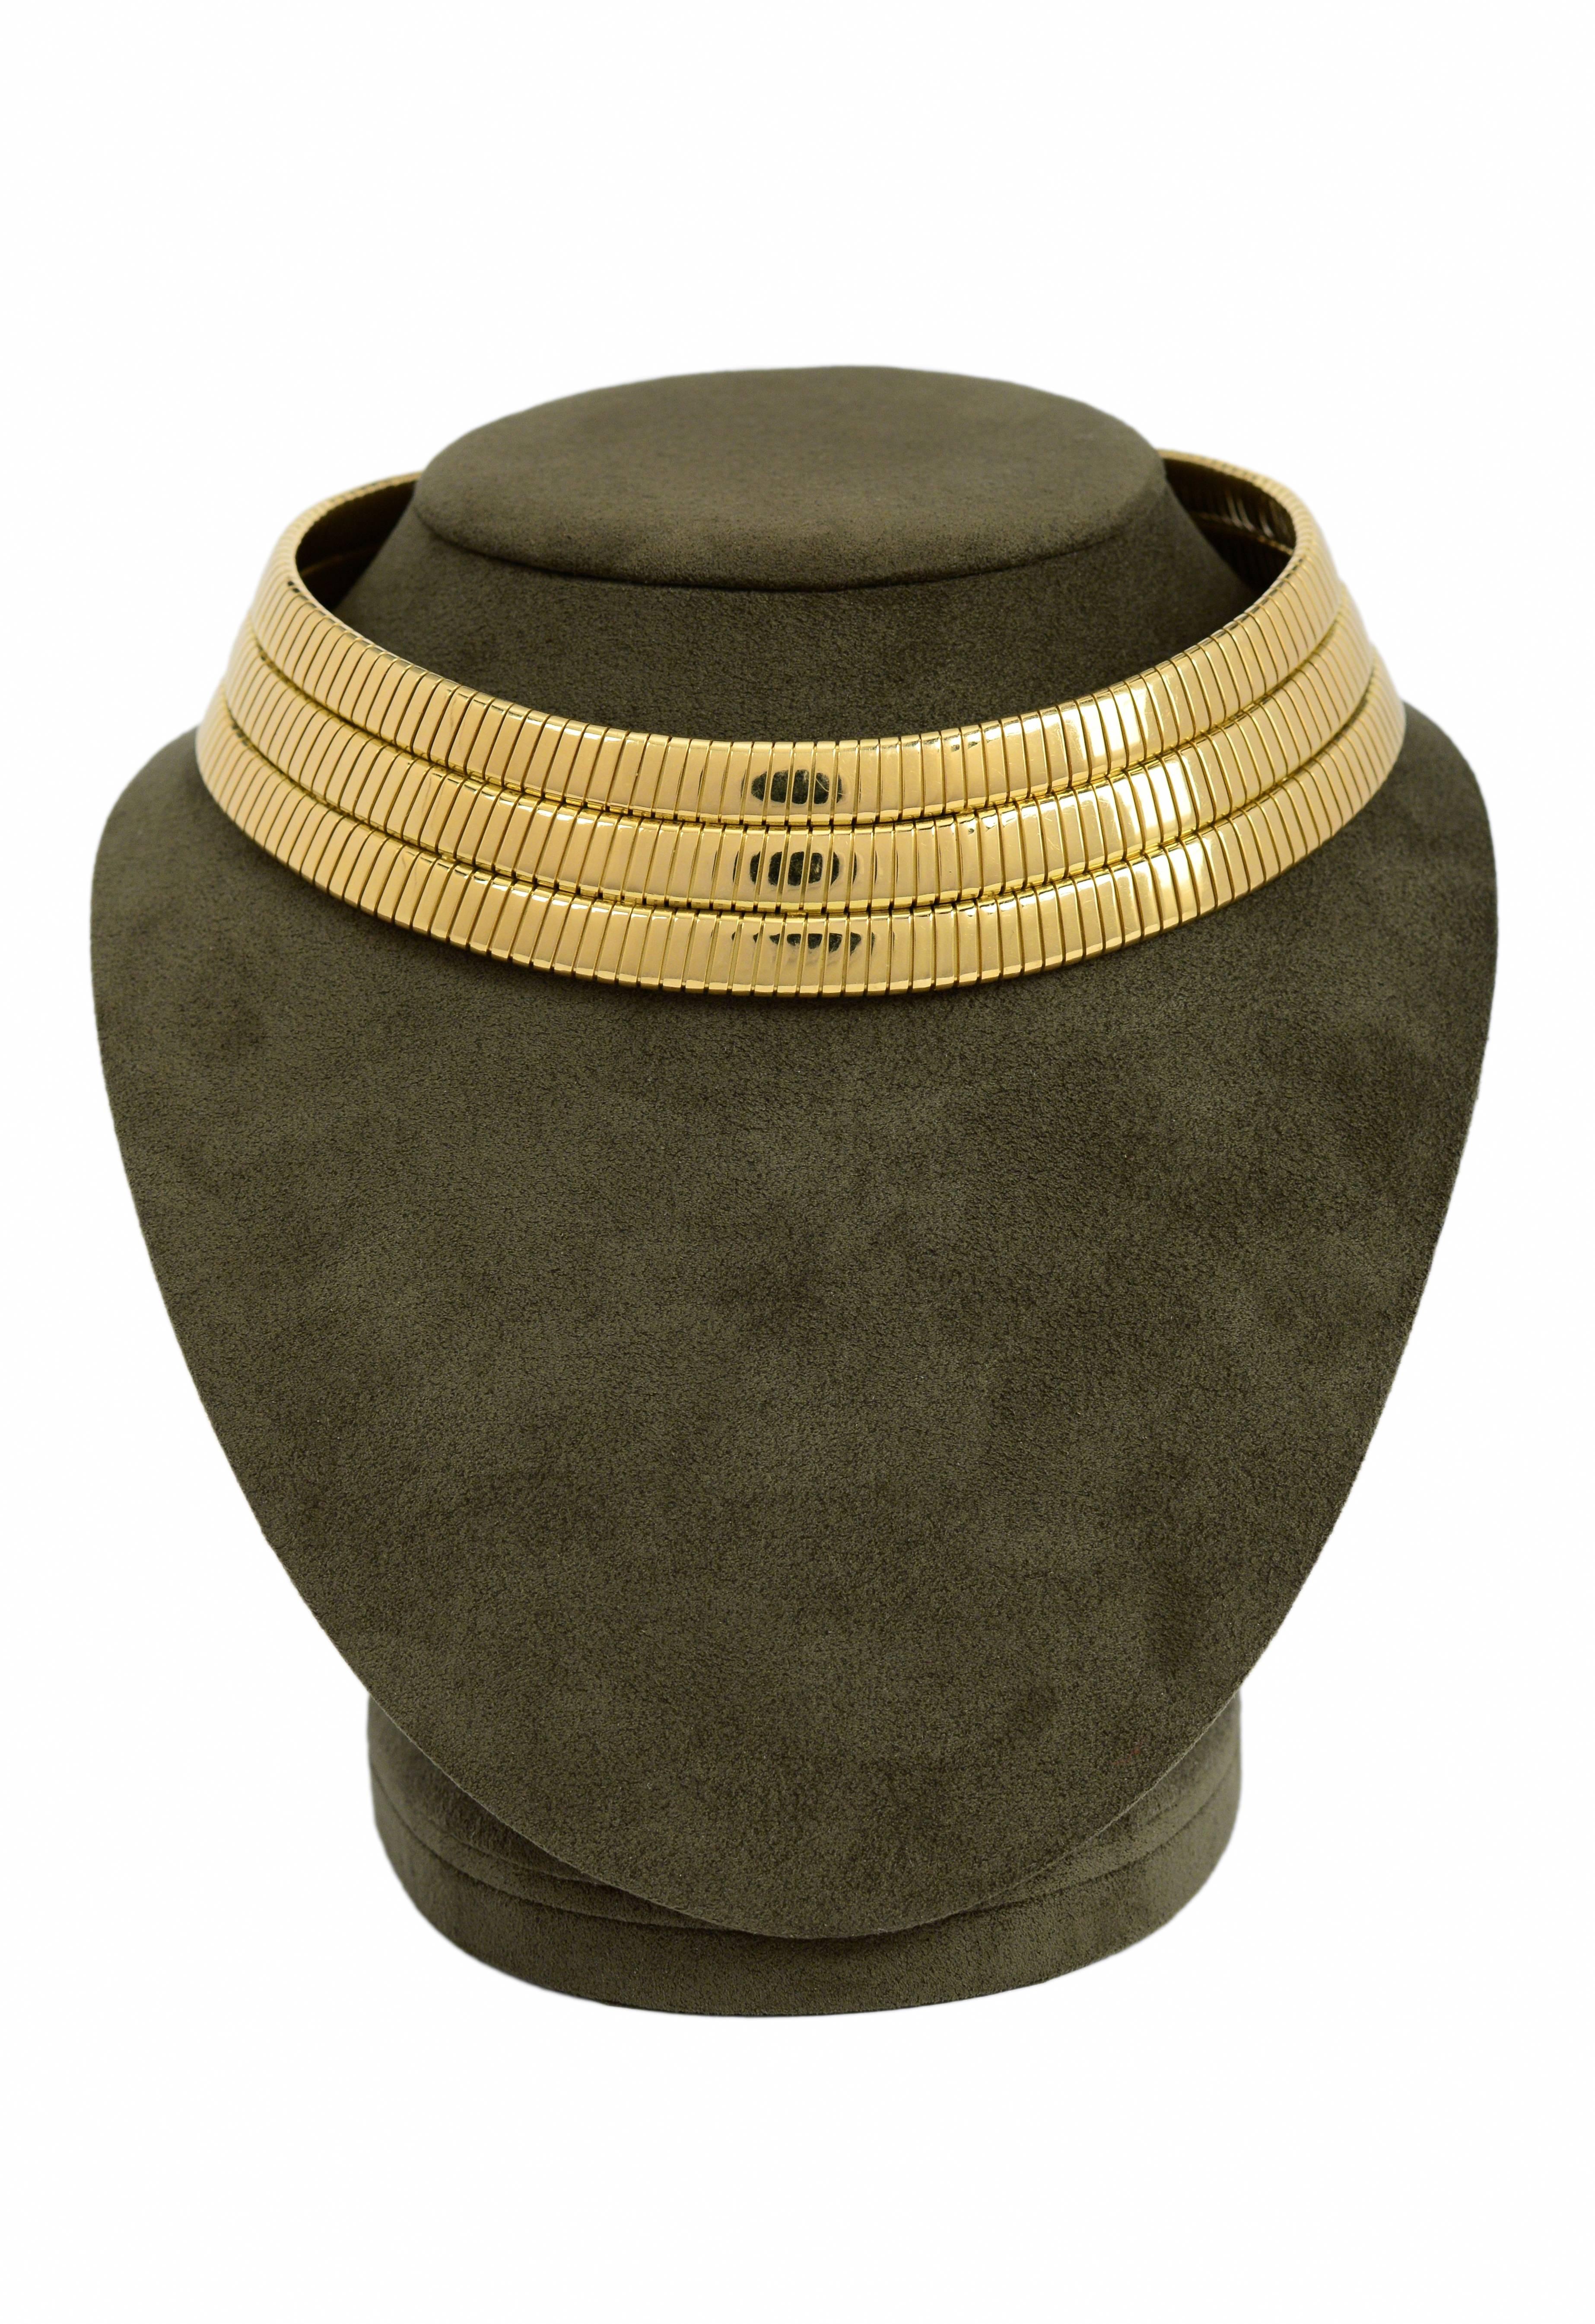 A rare Bulgari 18K gold three-row Tubogas choker necklace. Stamped BULGARI on back of clasp. Circa 1970's.

*Please contact for addition images or information. 